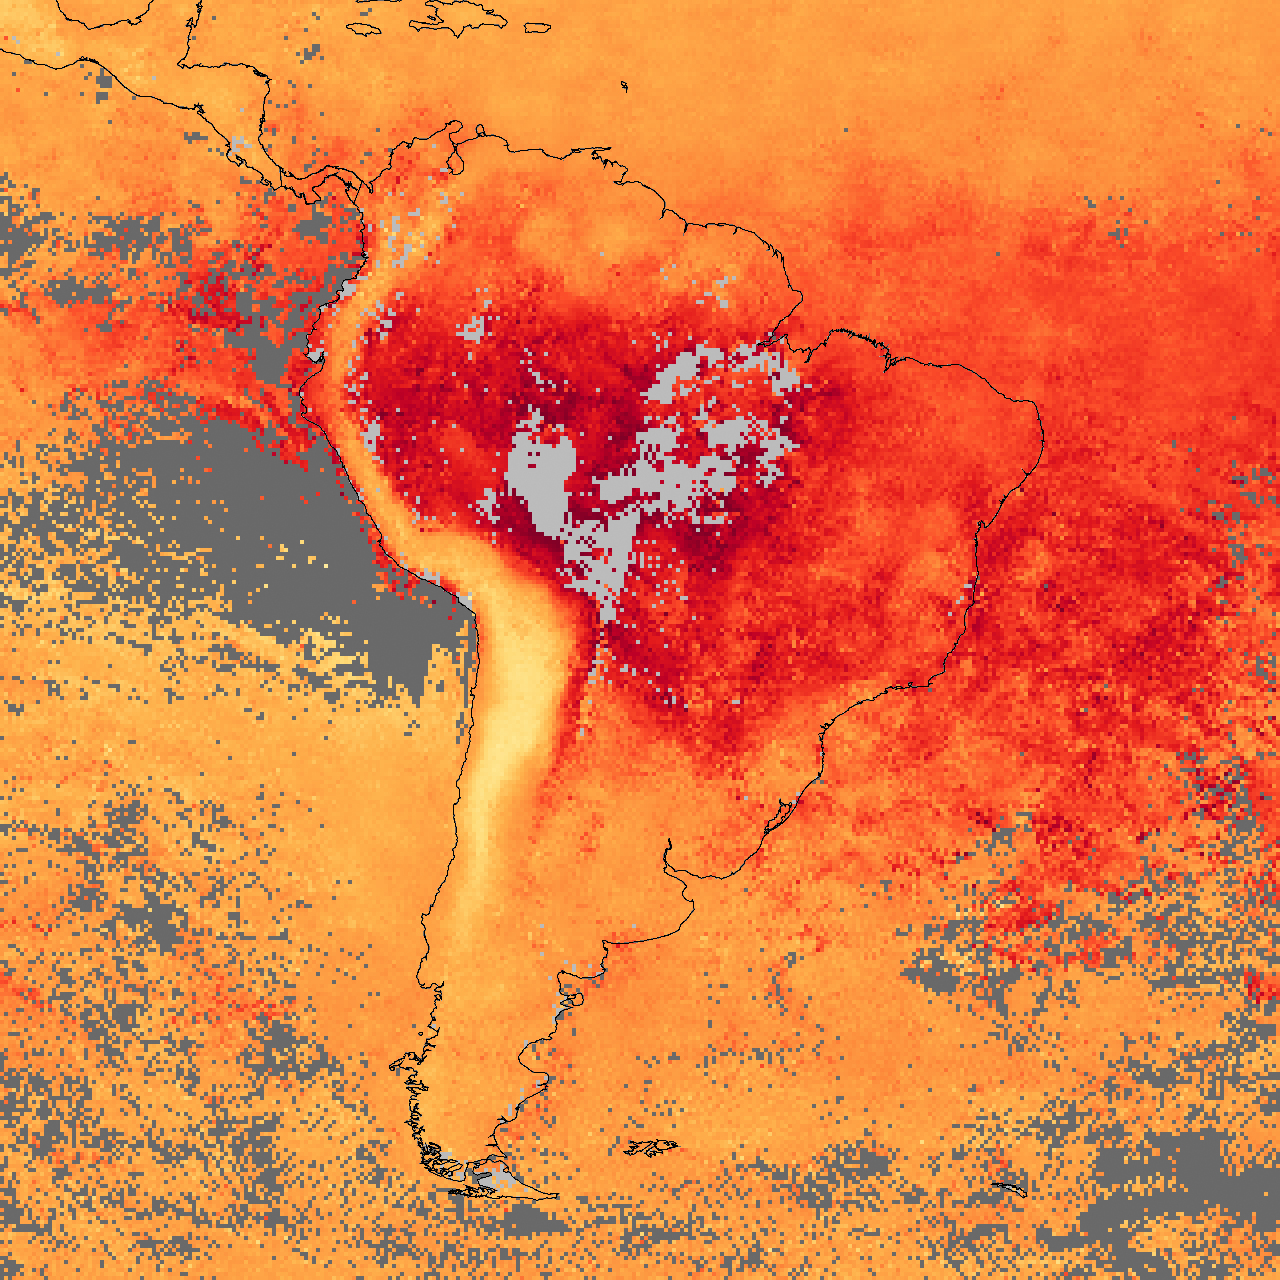 Fires and Thick Smoke over South America - related image preview